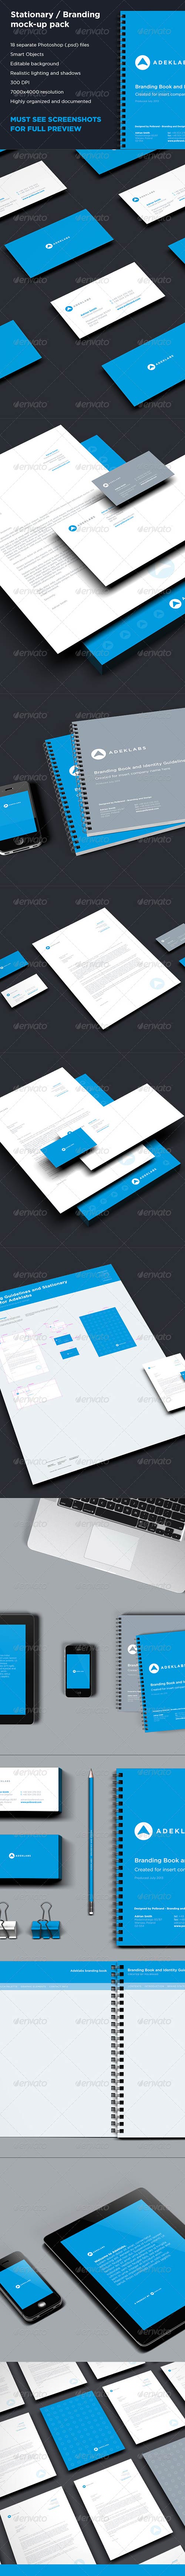 GraphicRiver - Branding and Stationary Mock-up Collection Pack